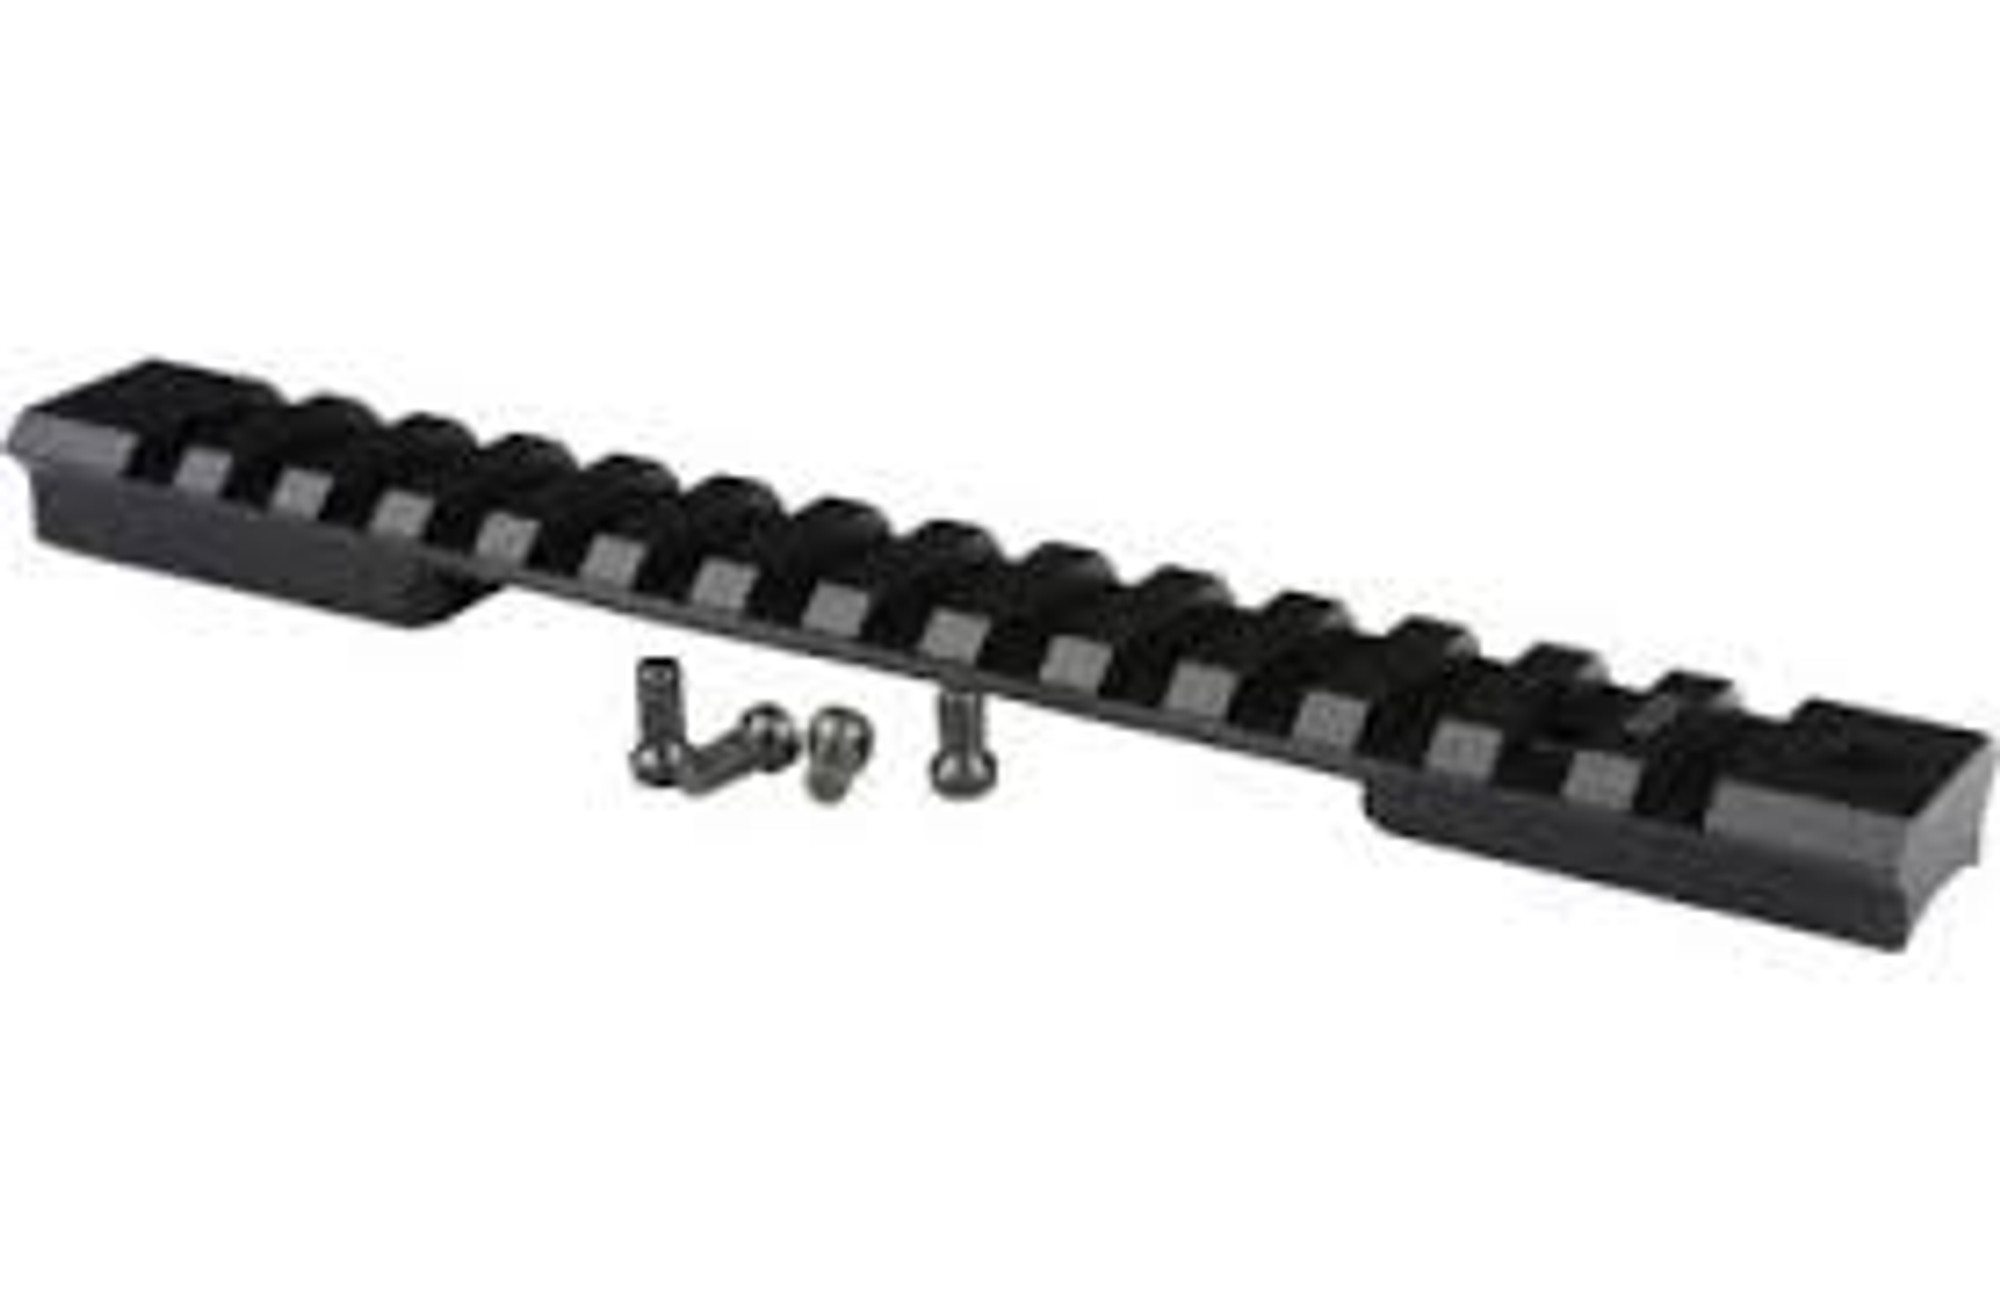 Ruger American Centerfire Short Action XP Tactical Rail